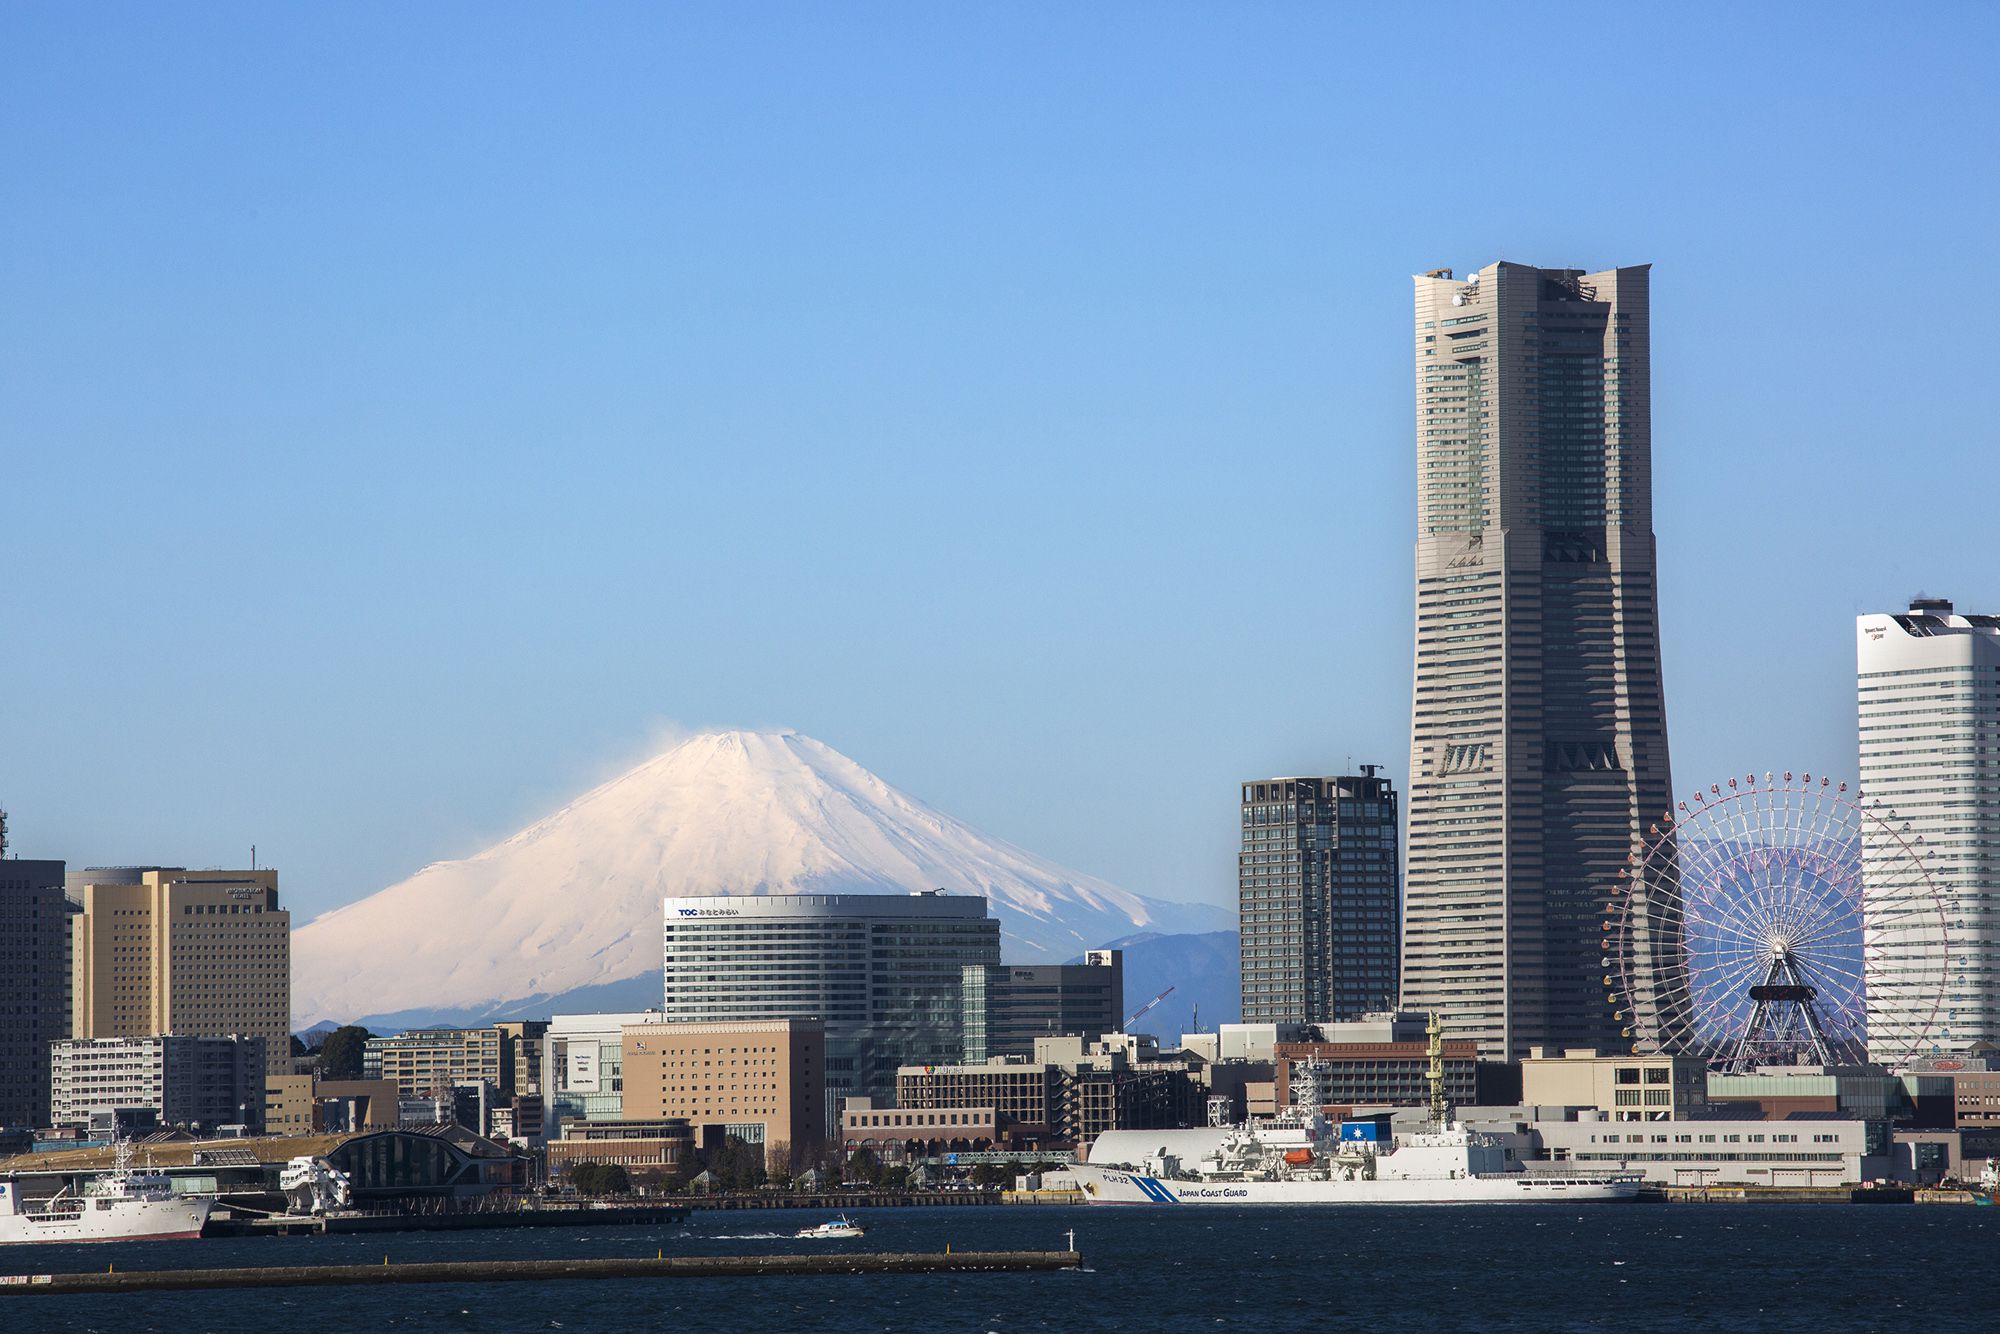 A snow-capped Mount Fuji glimpsed from off the Yokohama coast, from a ferry plying Tokyo Bay.